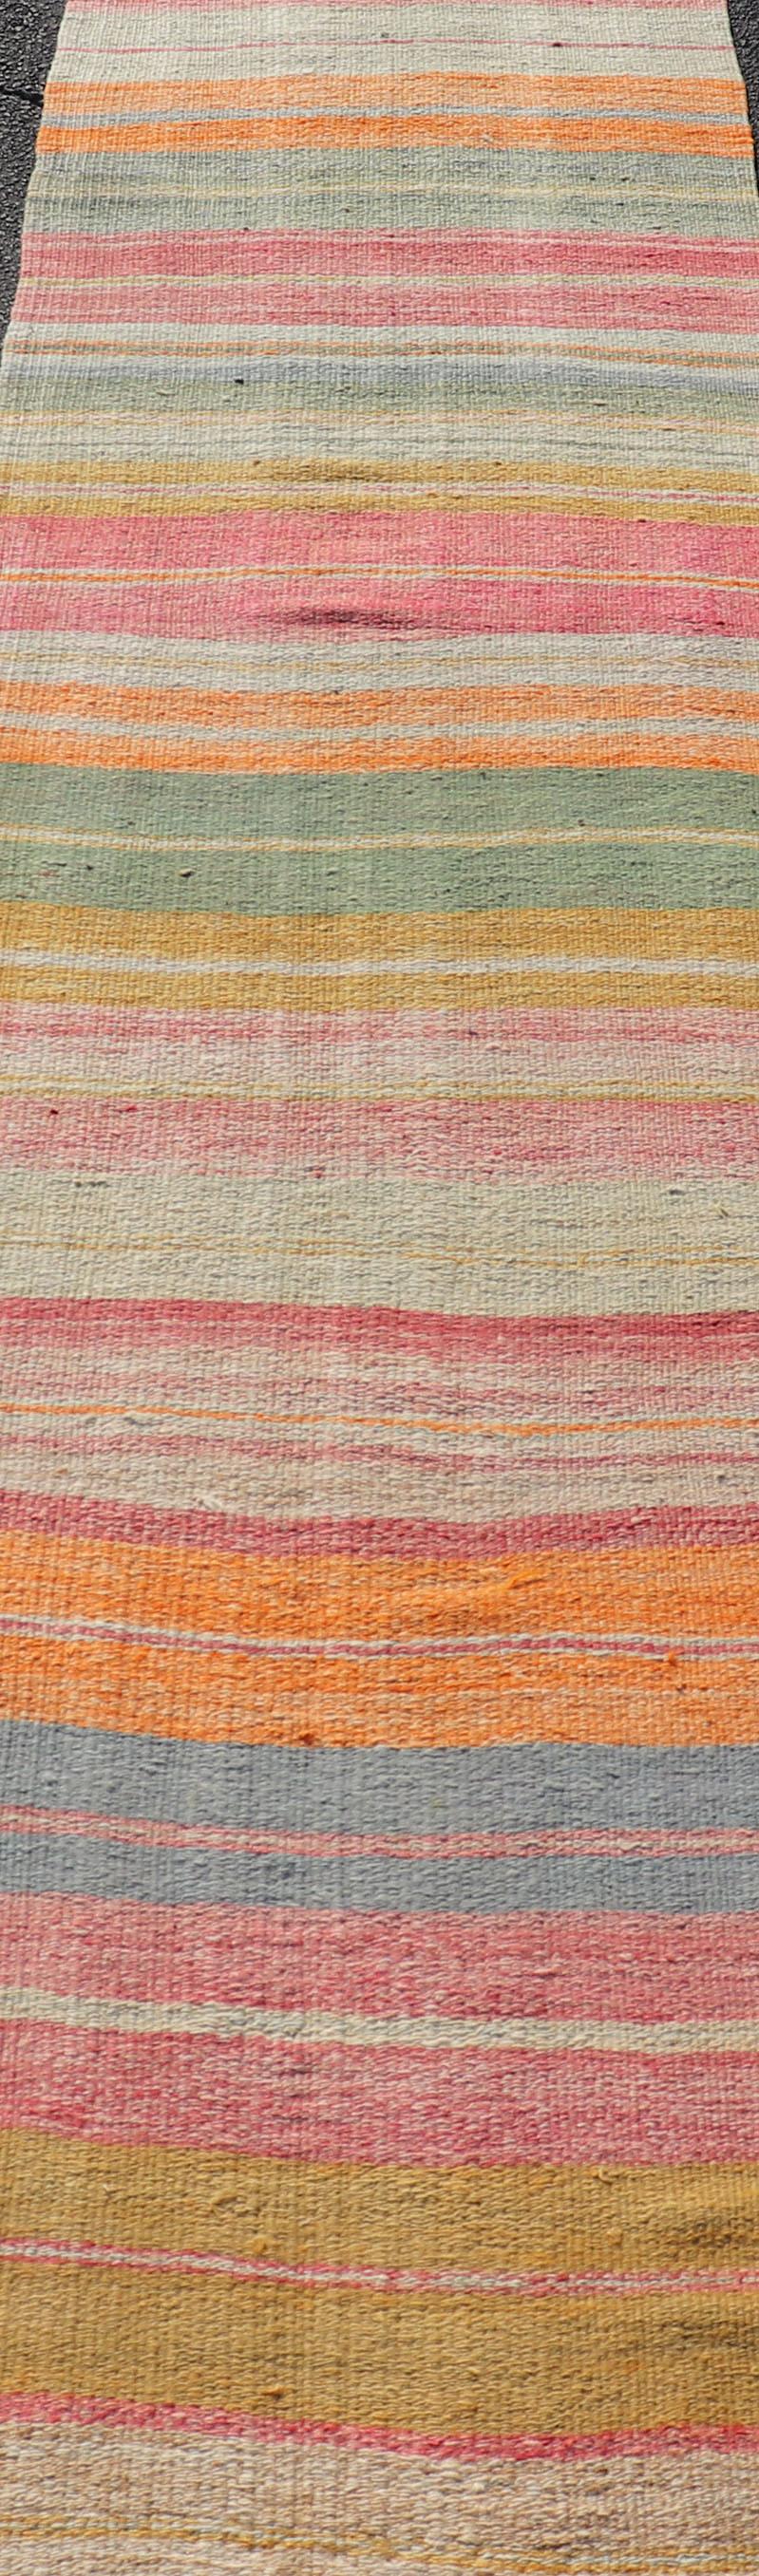 Wool Vintage Turkish Kilim Runner with Horizontal Stripes in Bright Color Tones For Sale